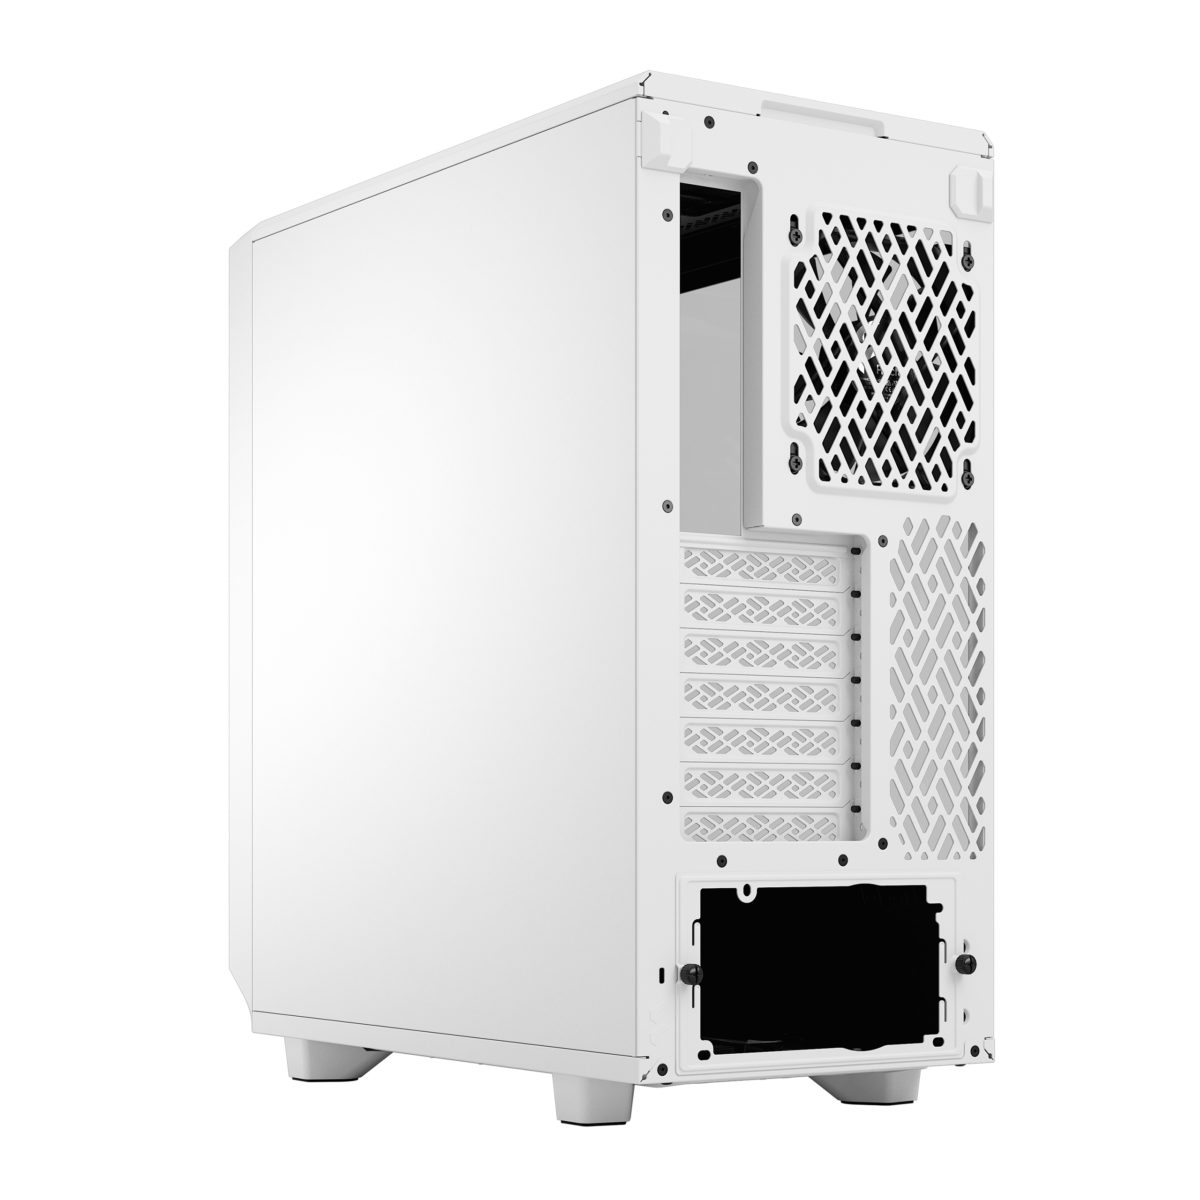 Meshify 2 Compact Clear Tempered Glass — Fractal Design